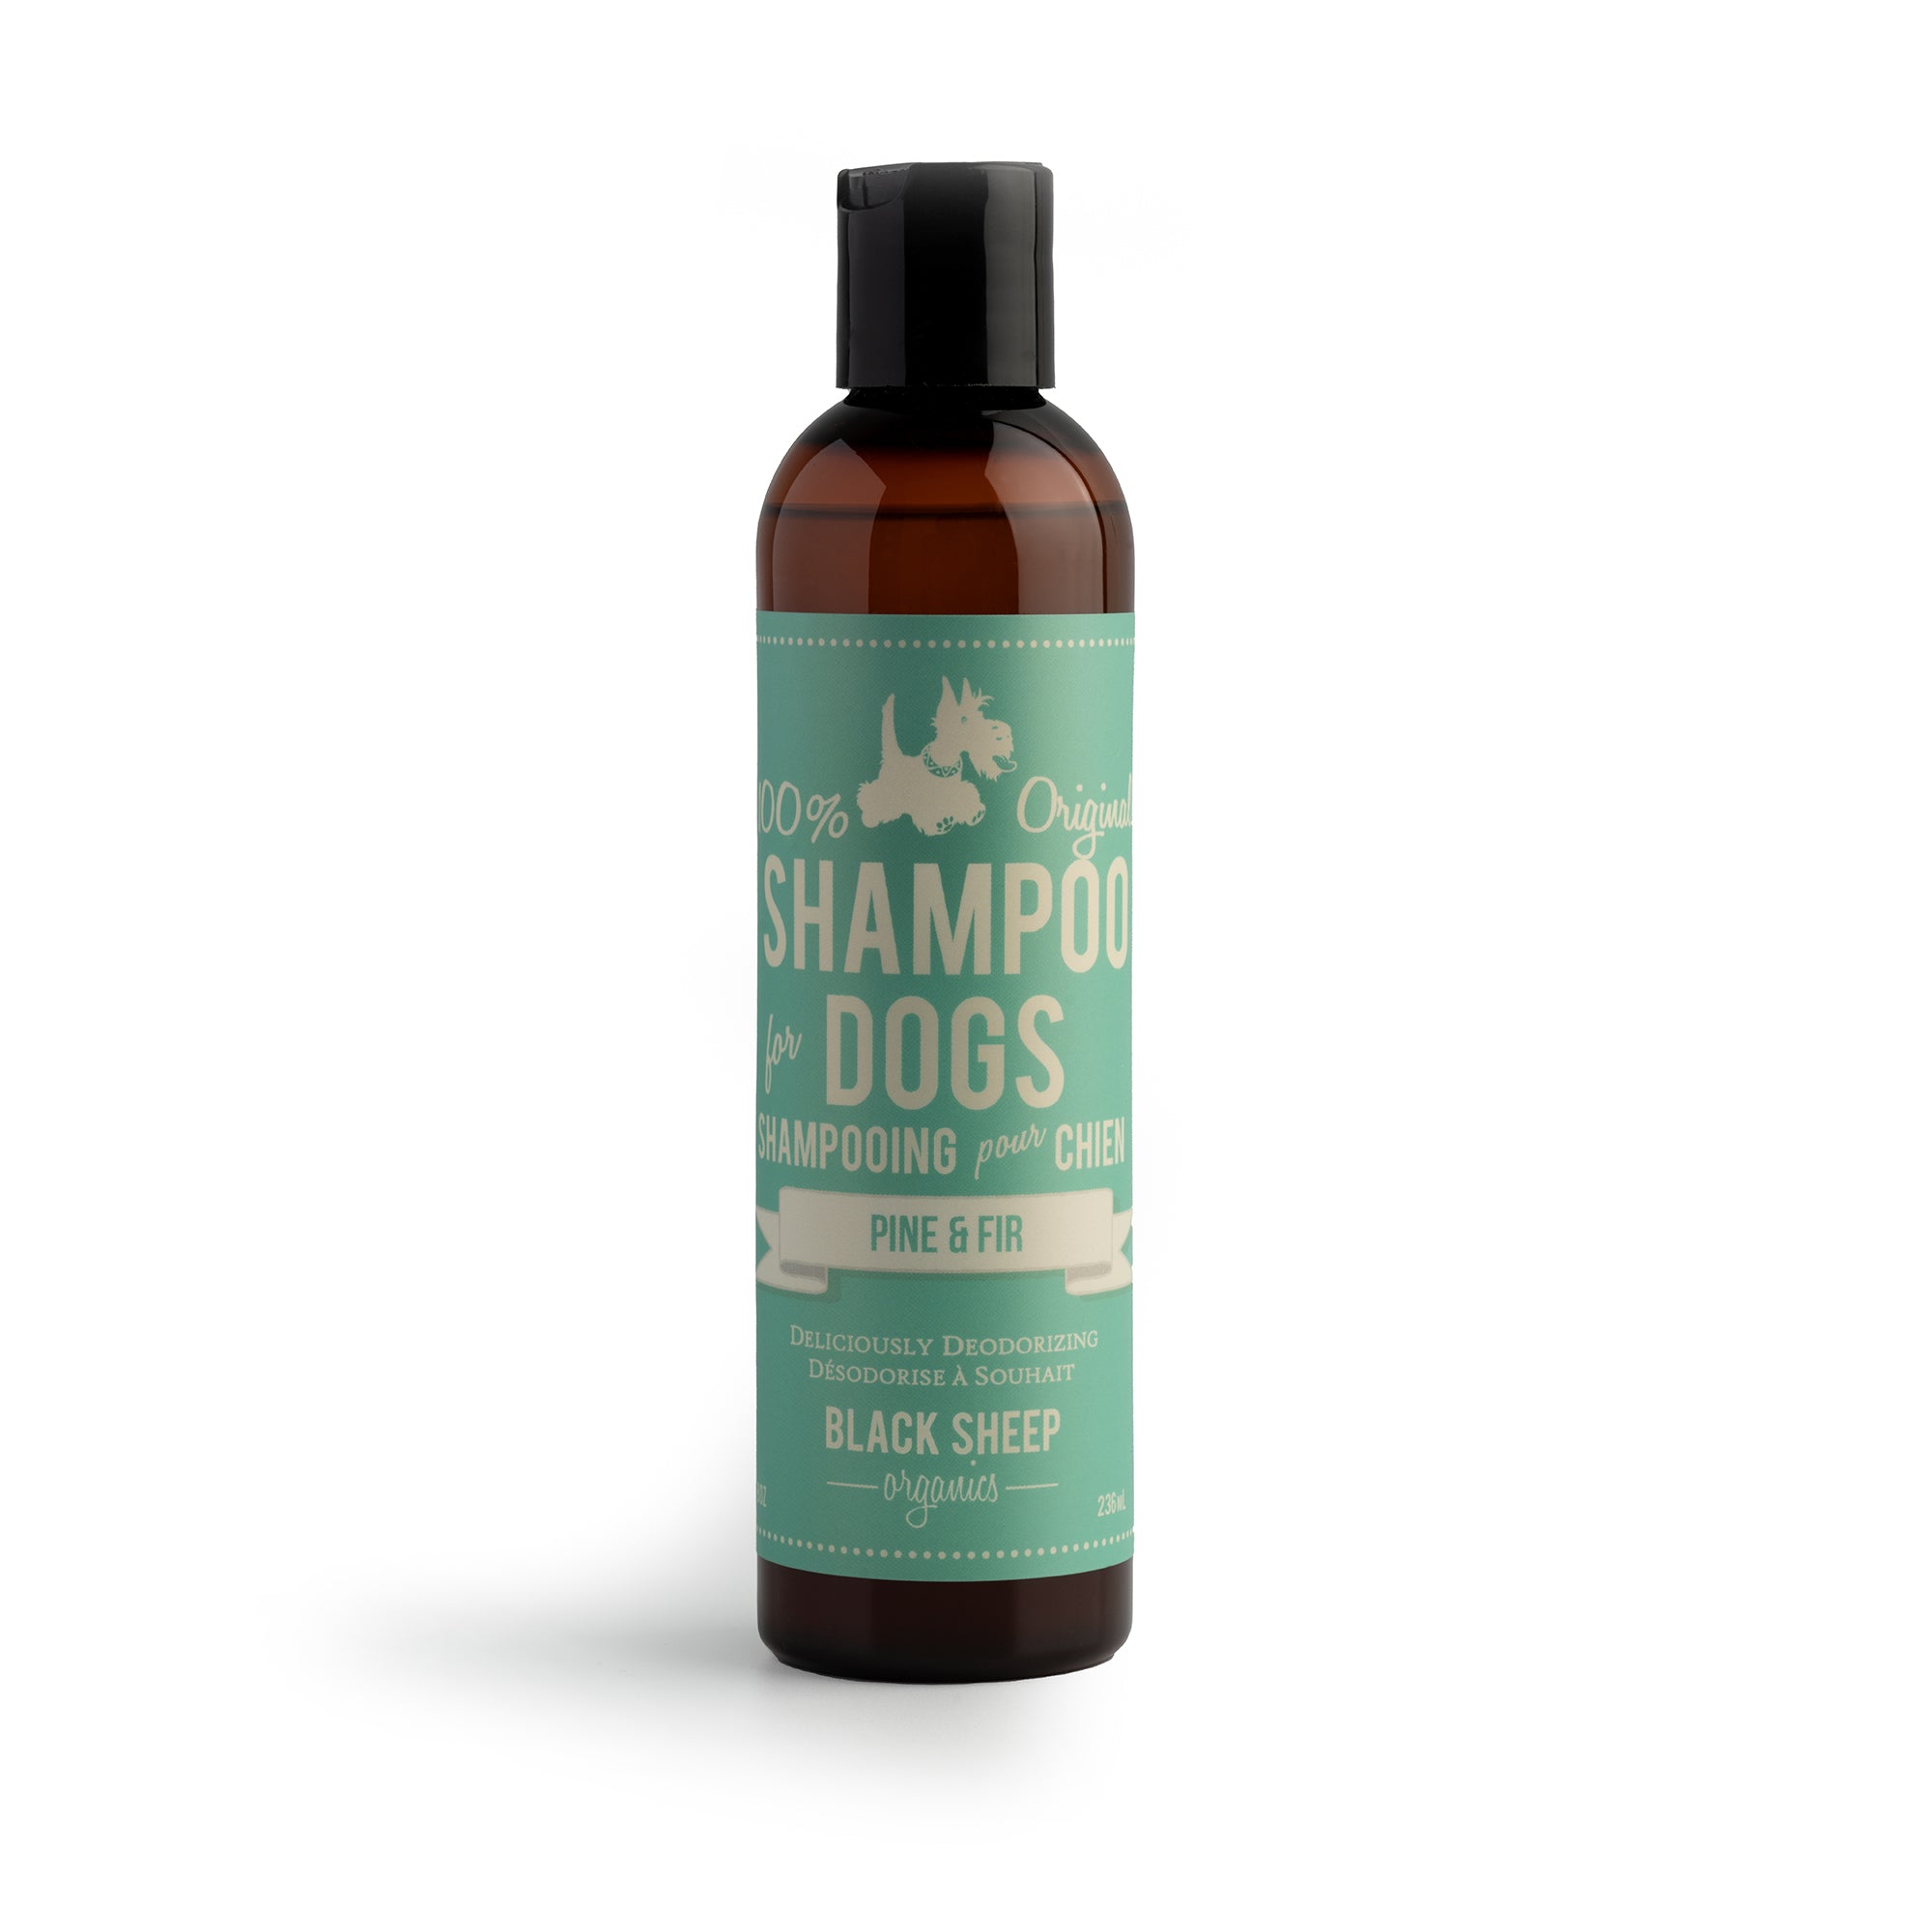 Pine & Fir Natural Dog Shampoo | deodorizing for dirty and stinky dogs ...